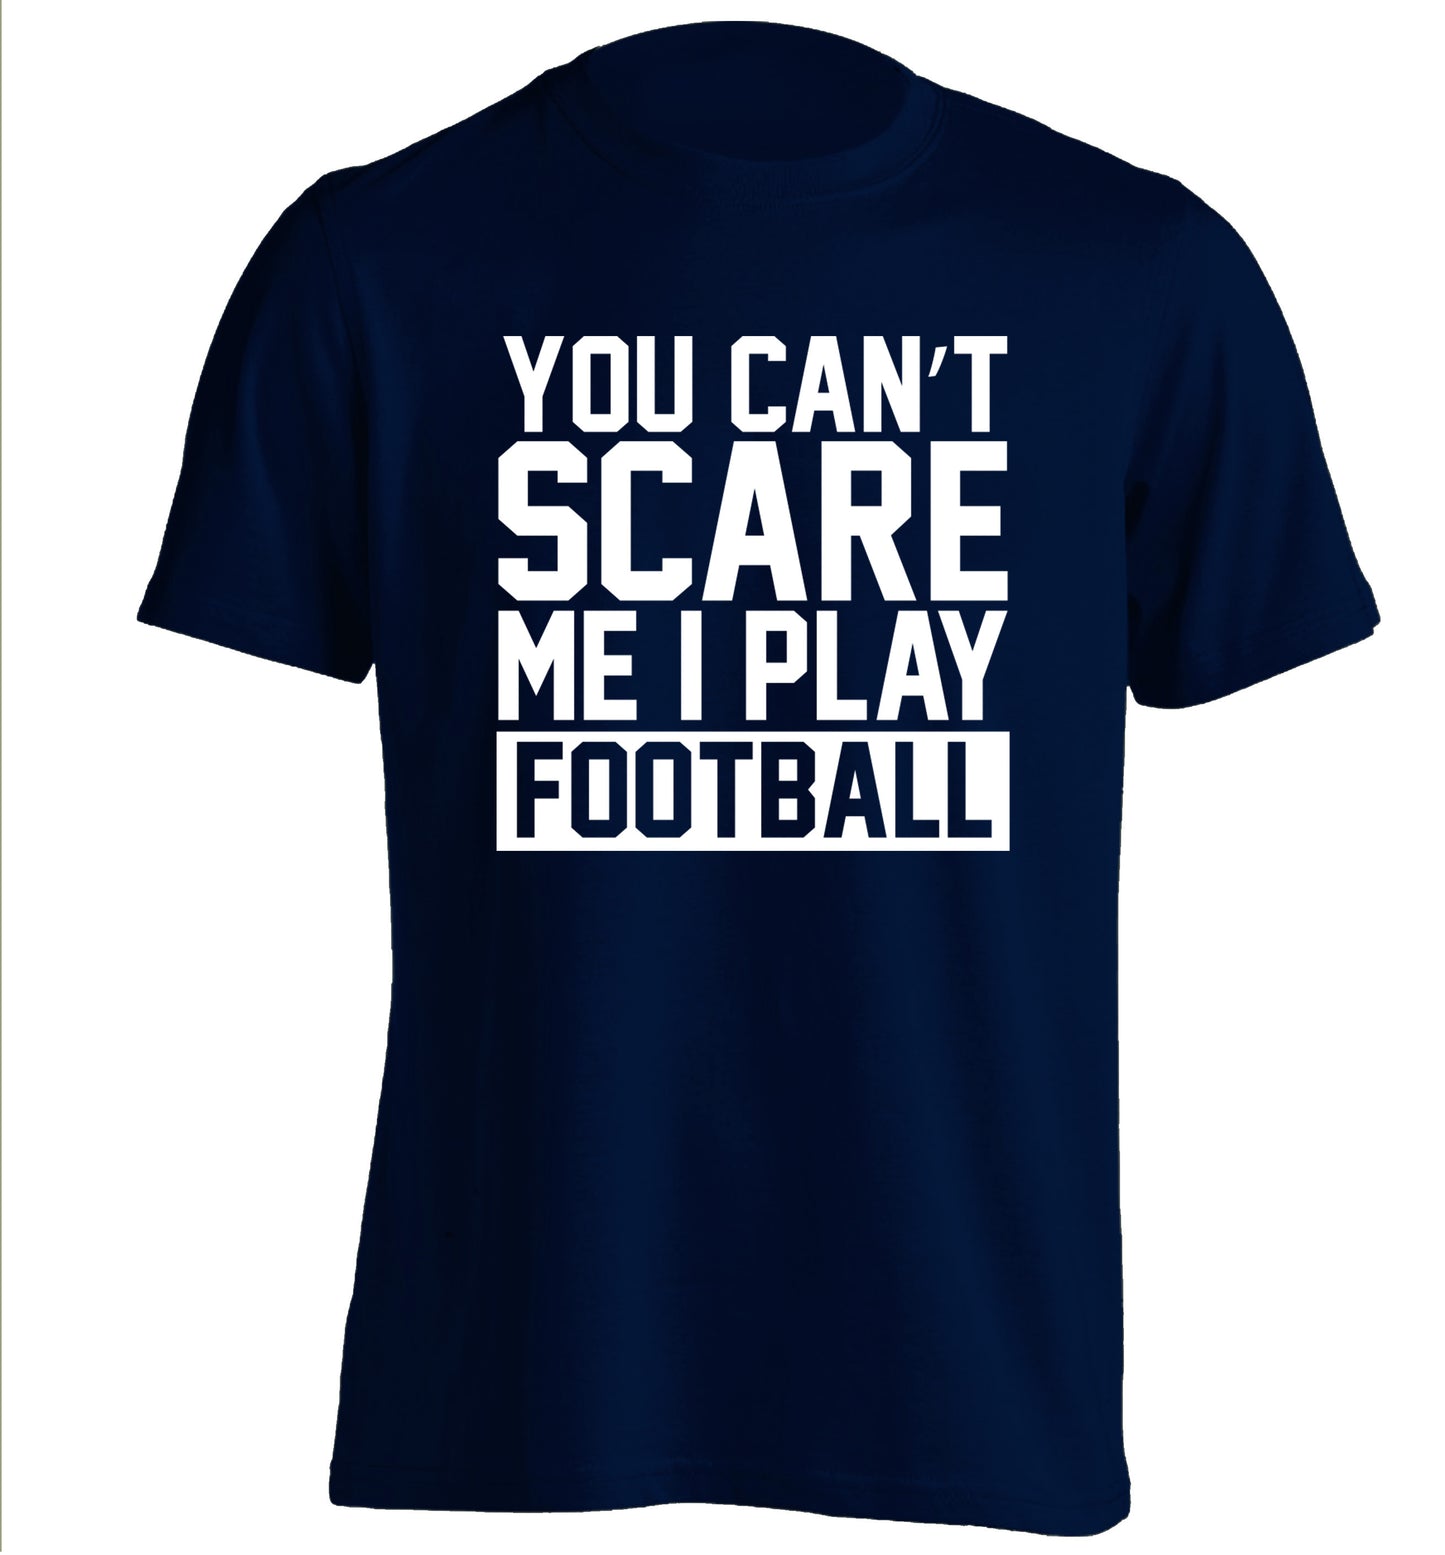 You can't scare me I play football adults unisex navy Tshirt 2XL